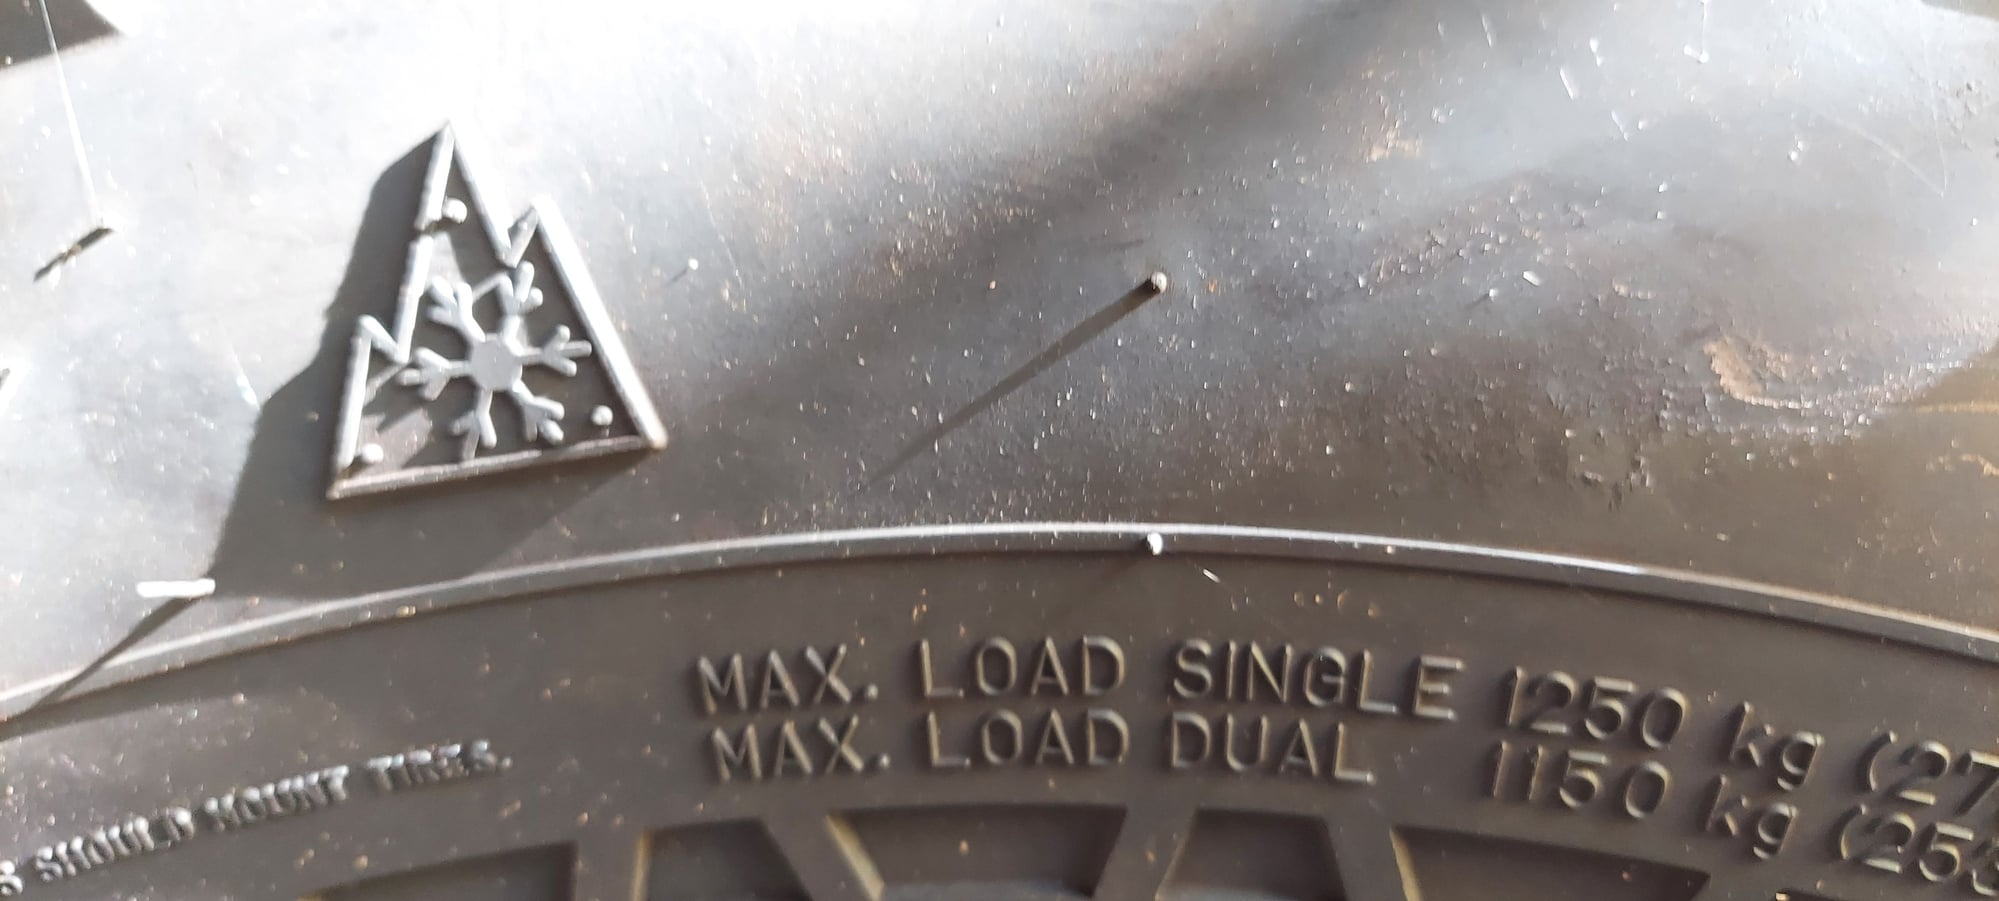 Wheels and Tires/Axles - JT Rubicon LE OEM Tires x 4 - Used - 2007 to 2018 Jeep Wrangler - New Castle, DE 19720, United States